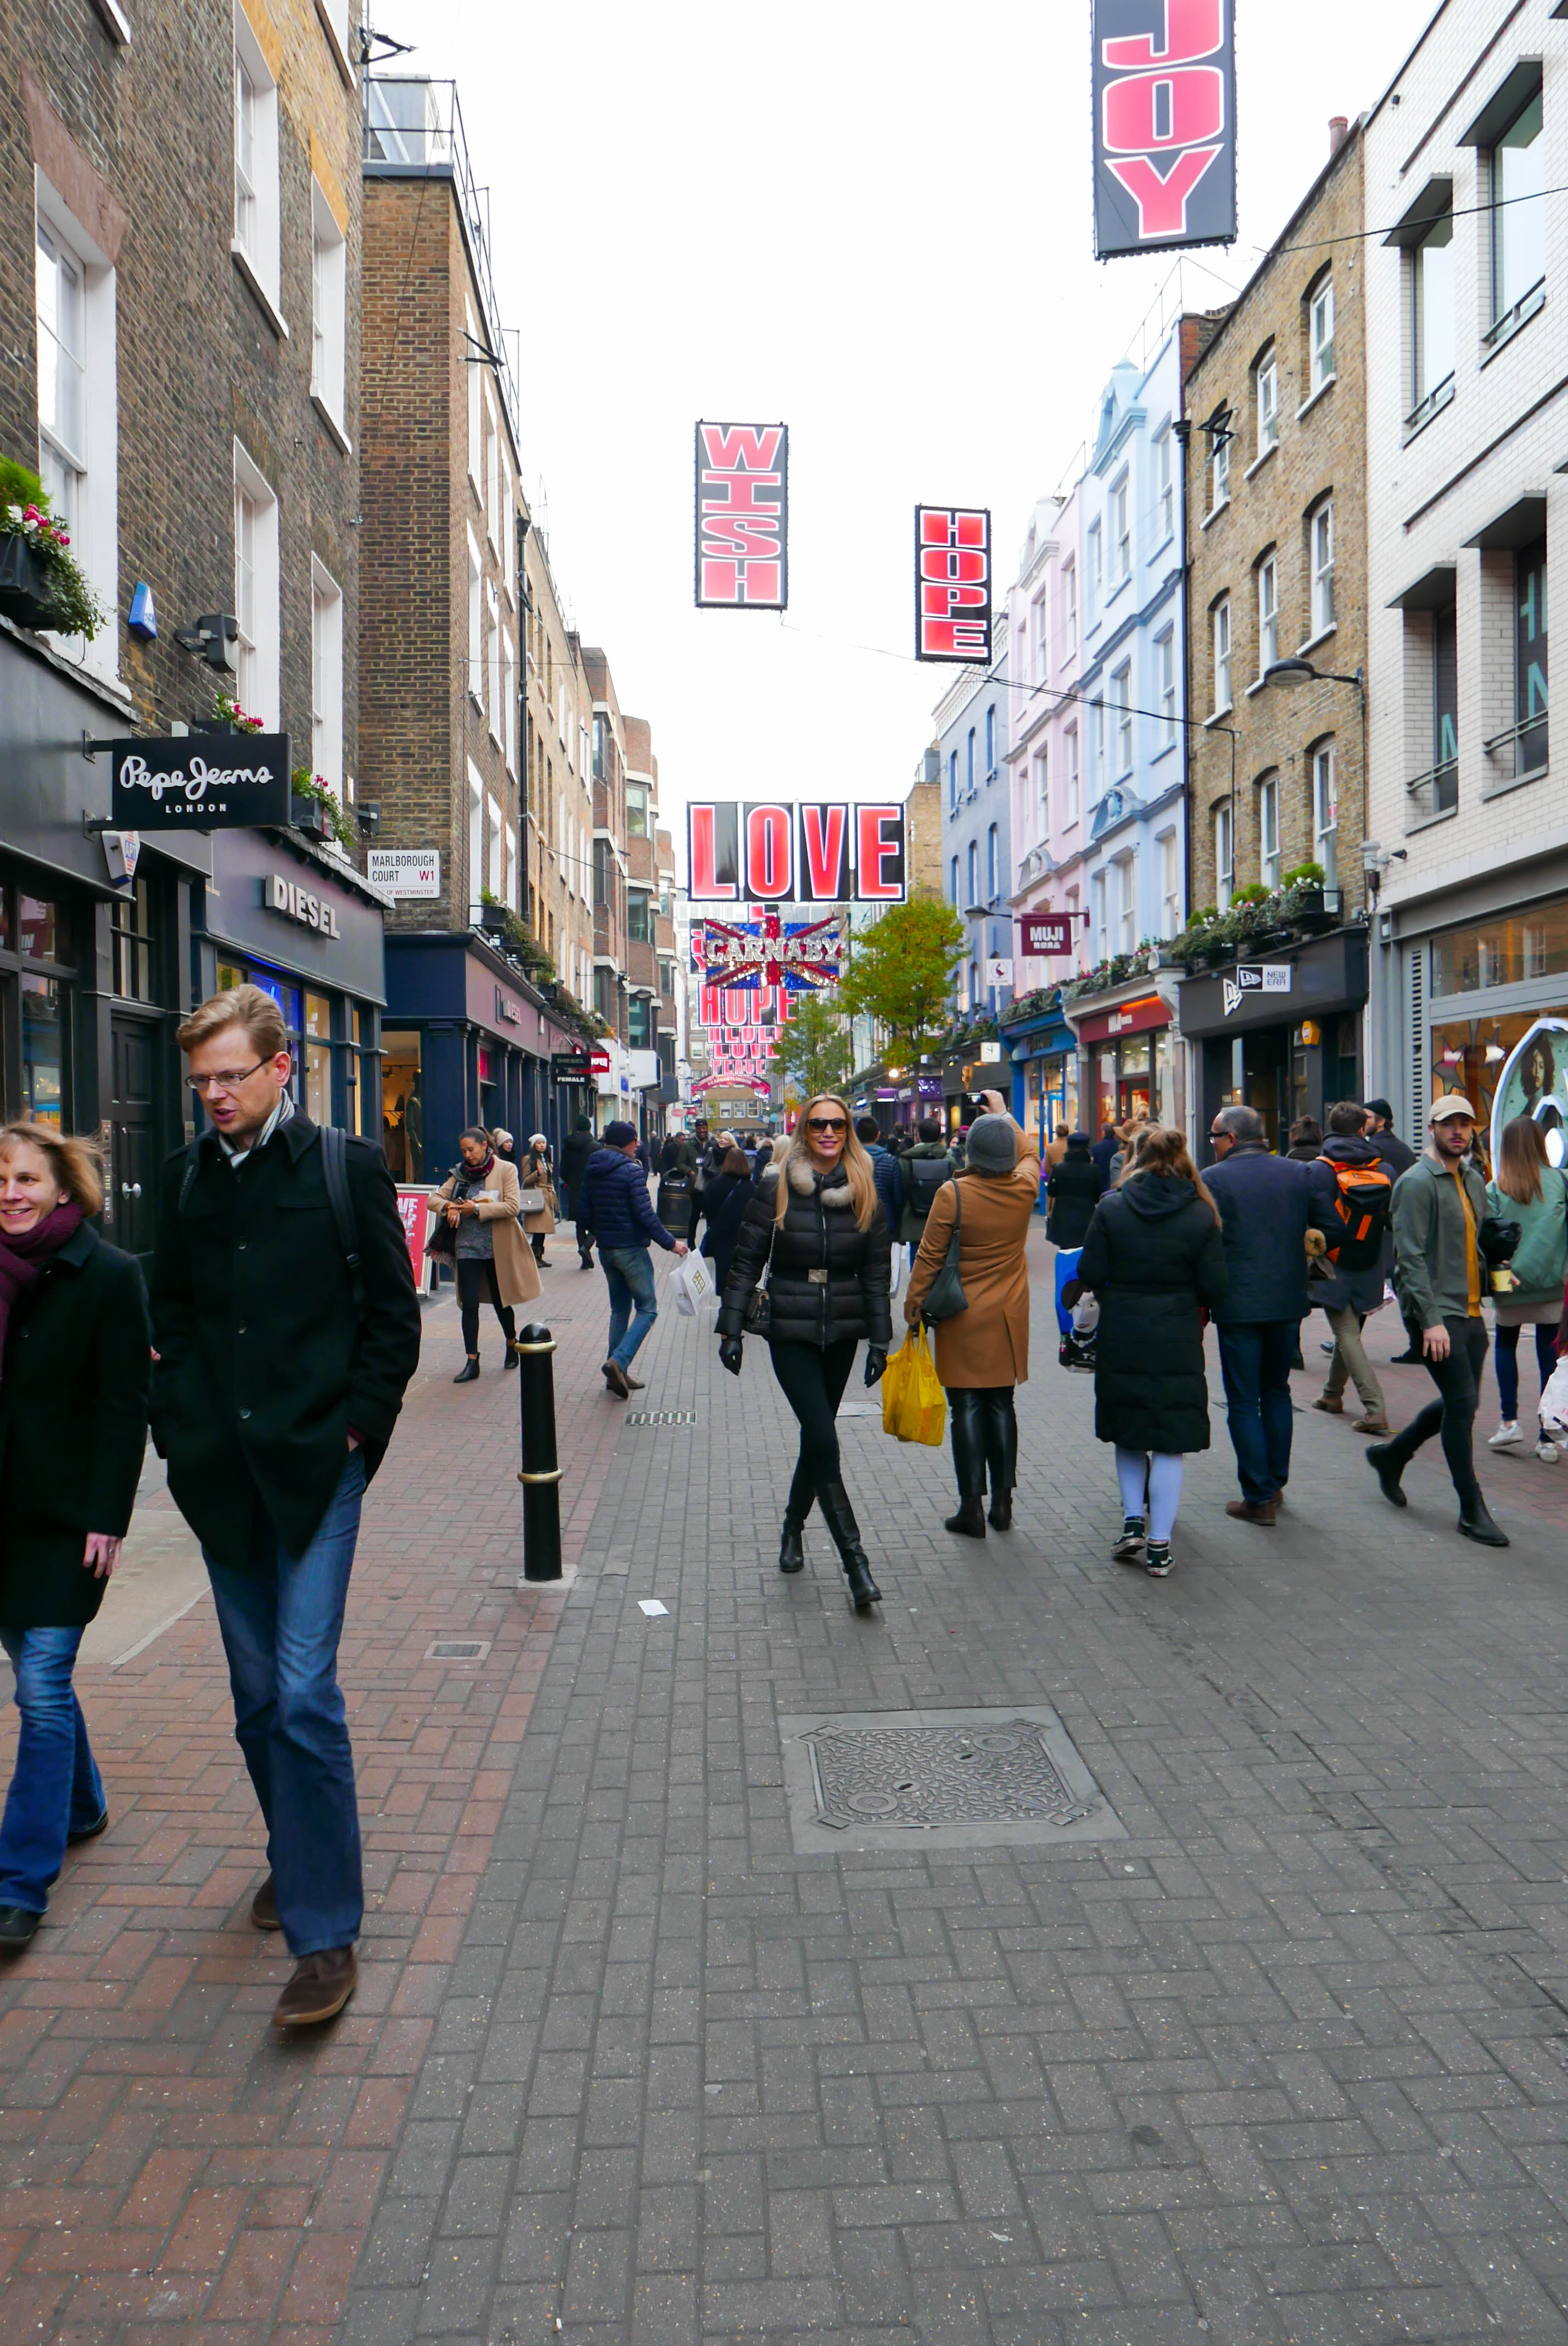 There is no place like Carnaby Street